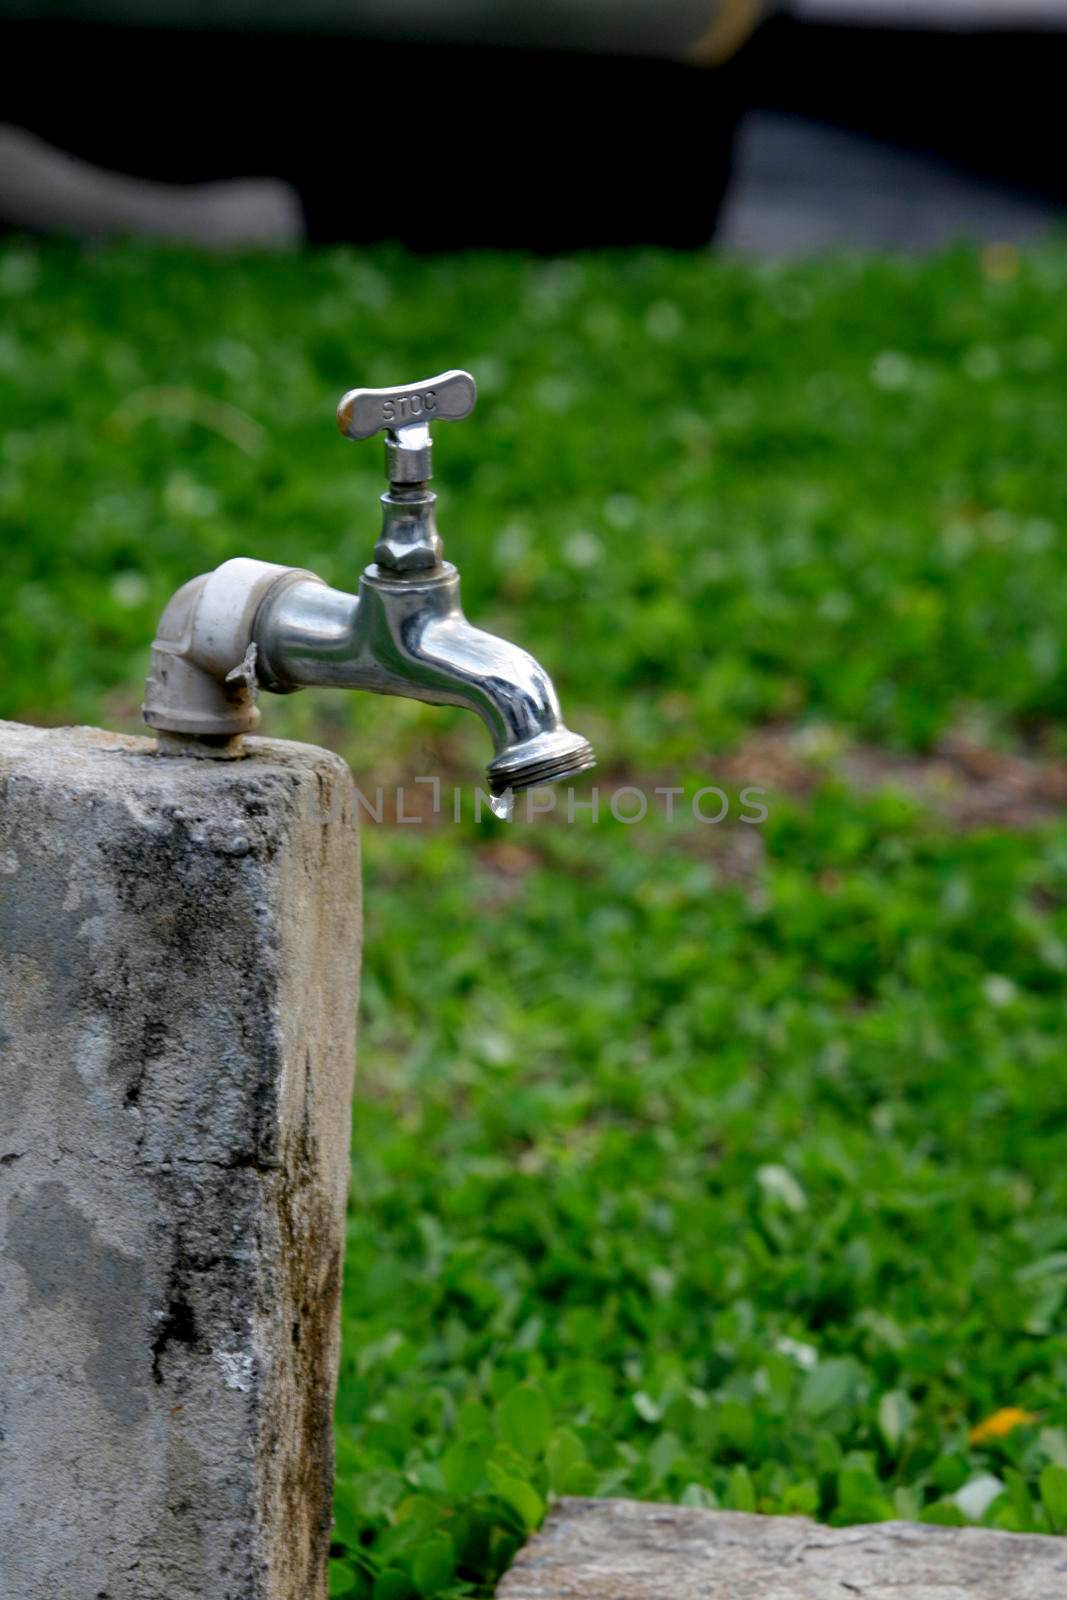 salvador, bahia / brazil - november 9, 2013: leaky faucet is seen in the city of Salvador.